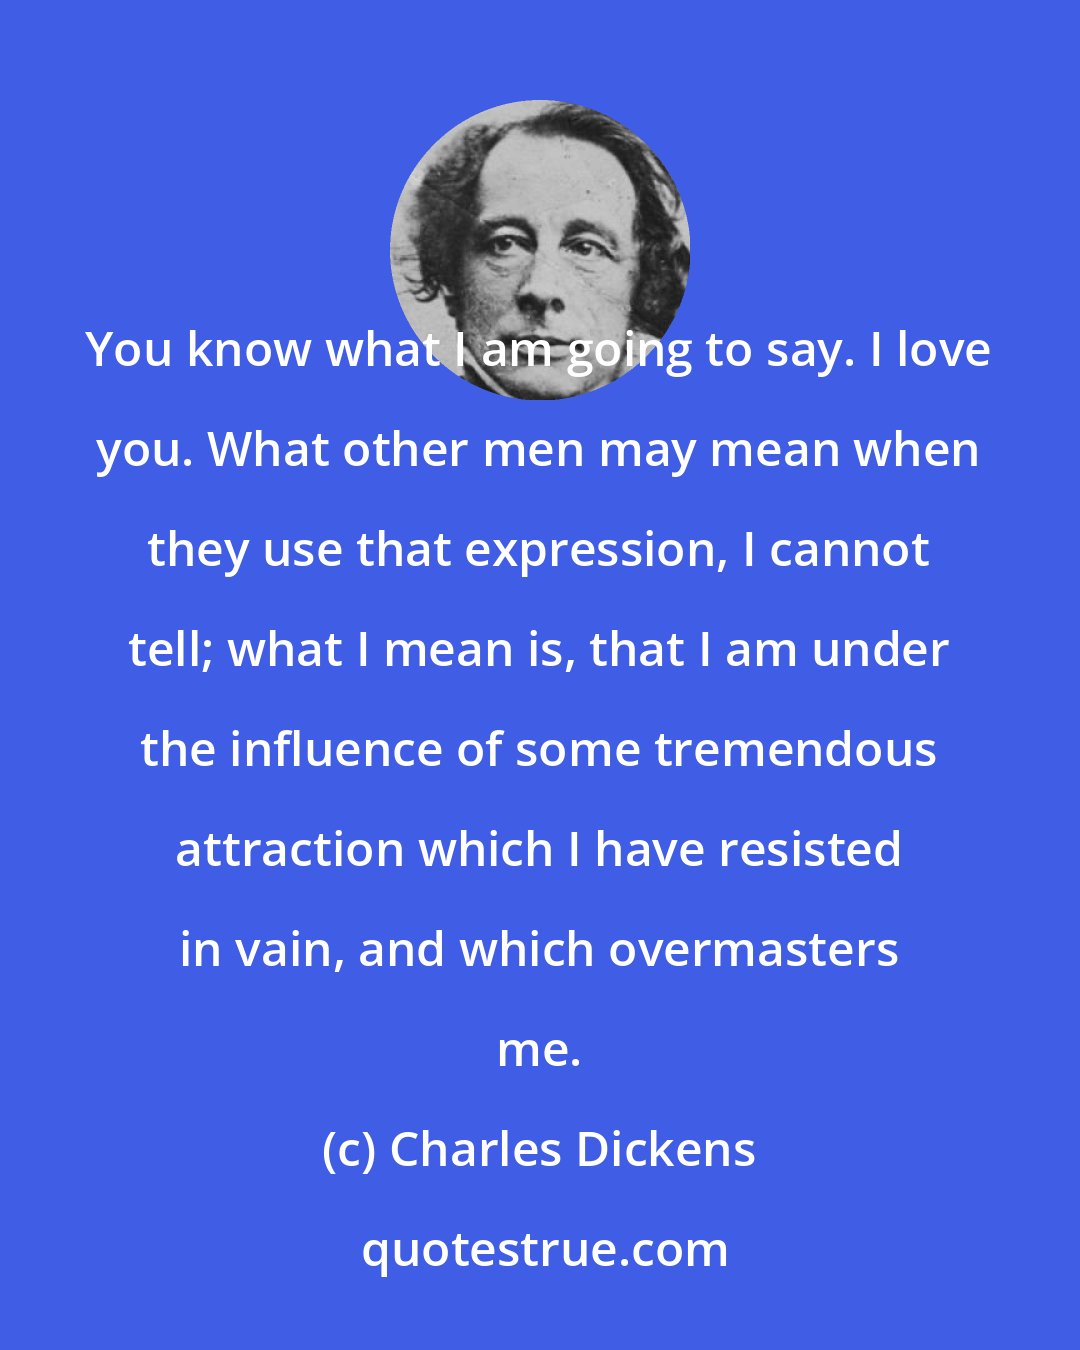 Charles Dickens: You know what I am going to say. I love you. What other men may mean when they use that expression, I cannot tell; what I mean is, that I am under the influence of some tremendous attraction which I have resisted in vain, and which overmasters me.